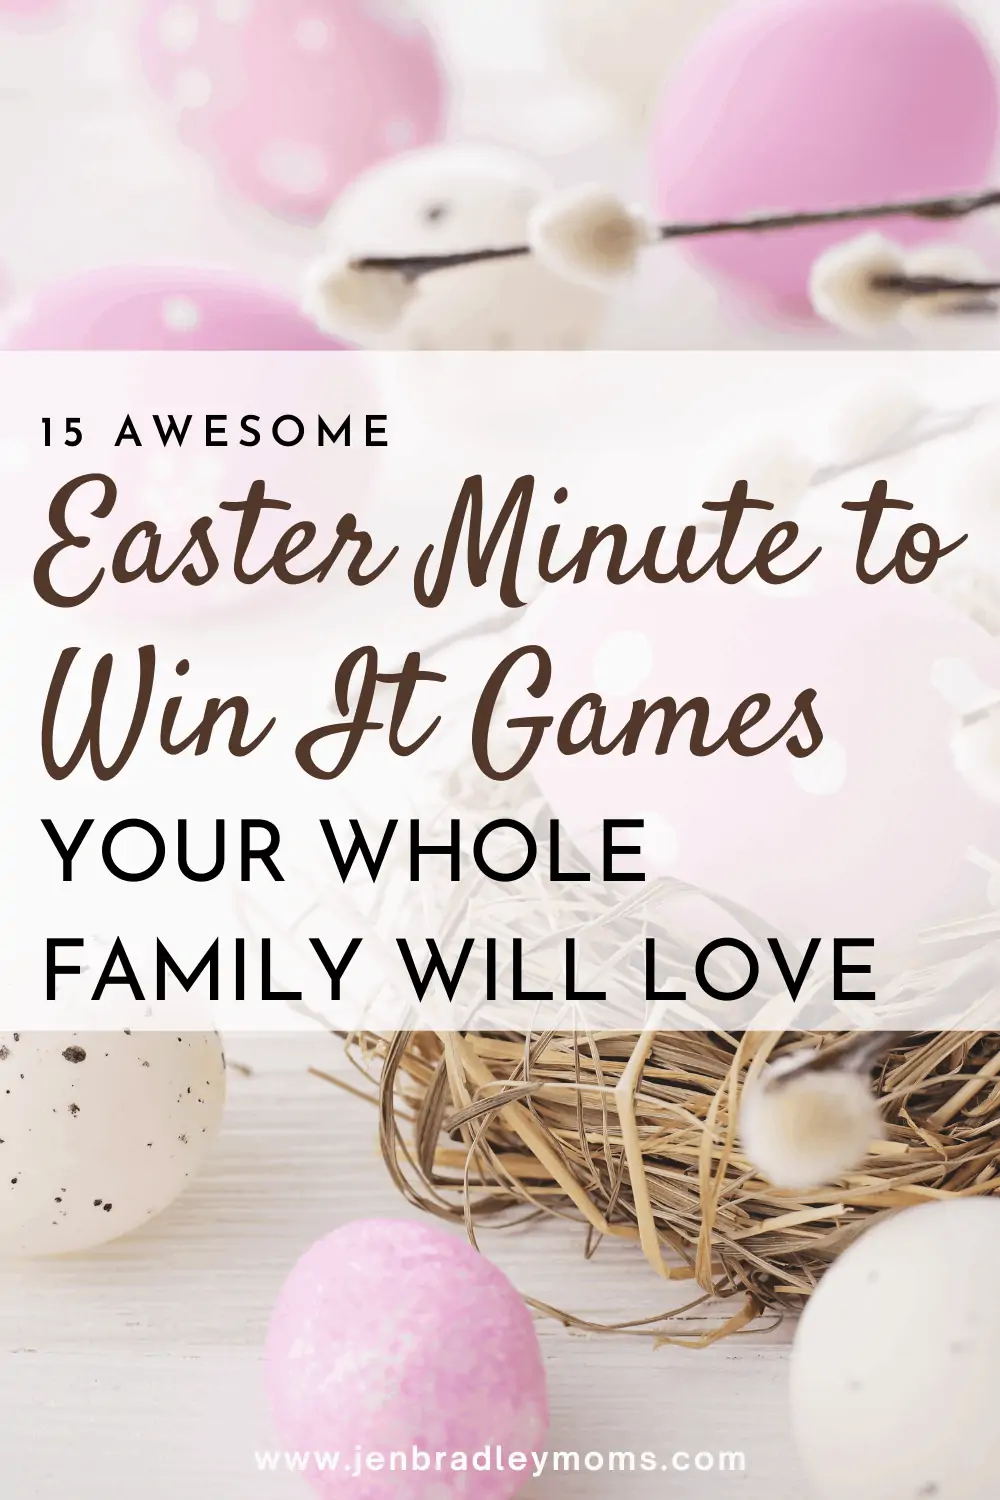 15 Awesome Minute to Win It Easter Games Your Family Will Love